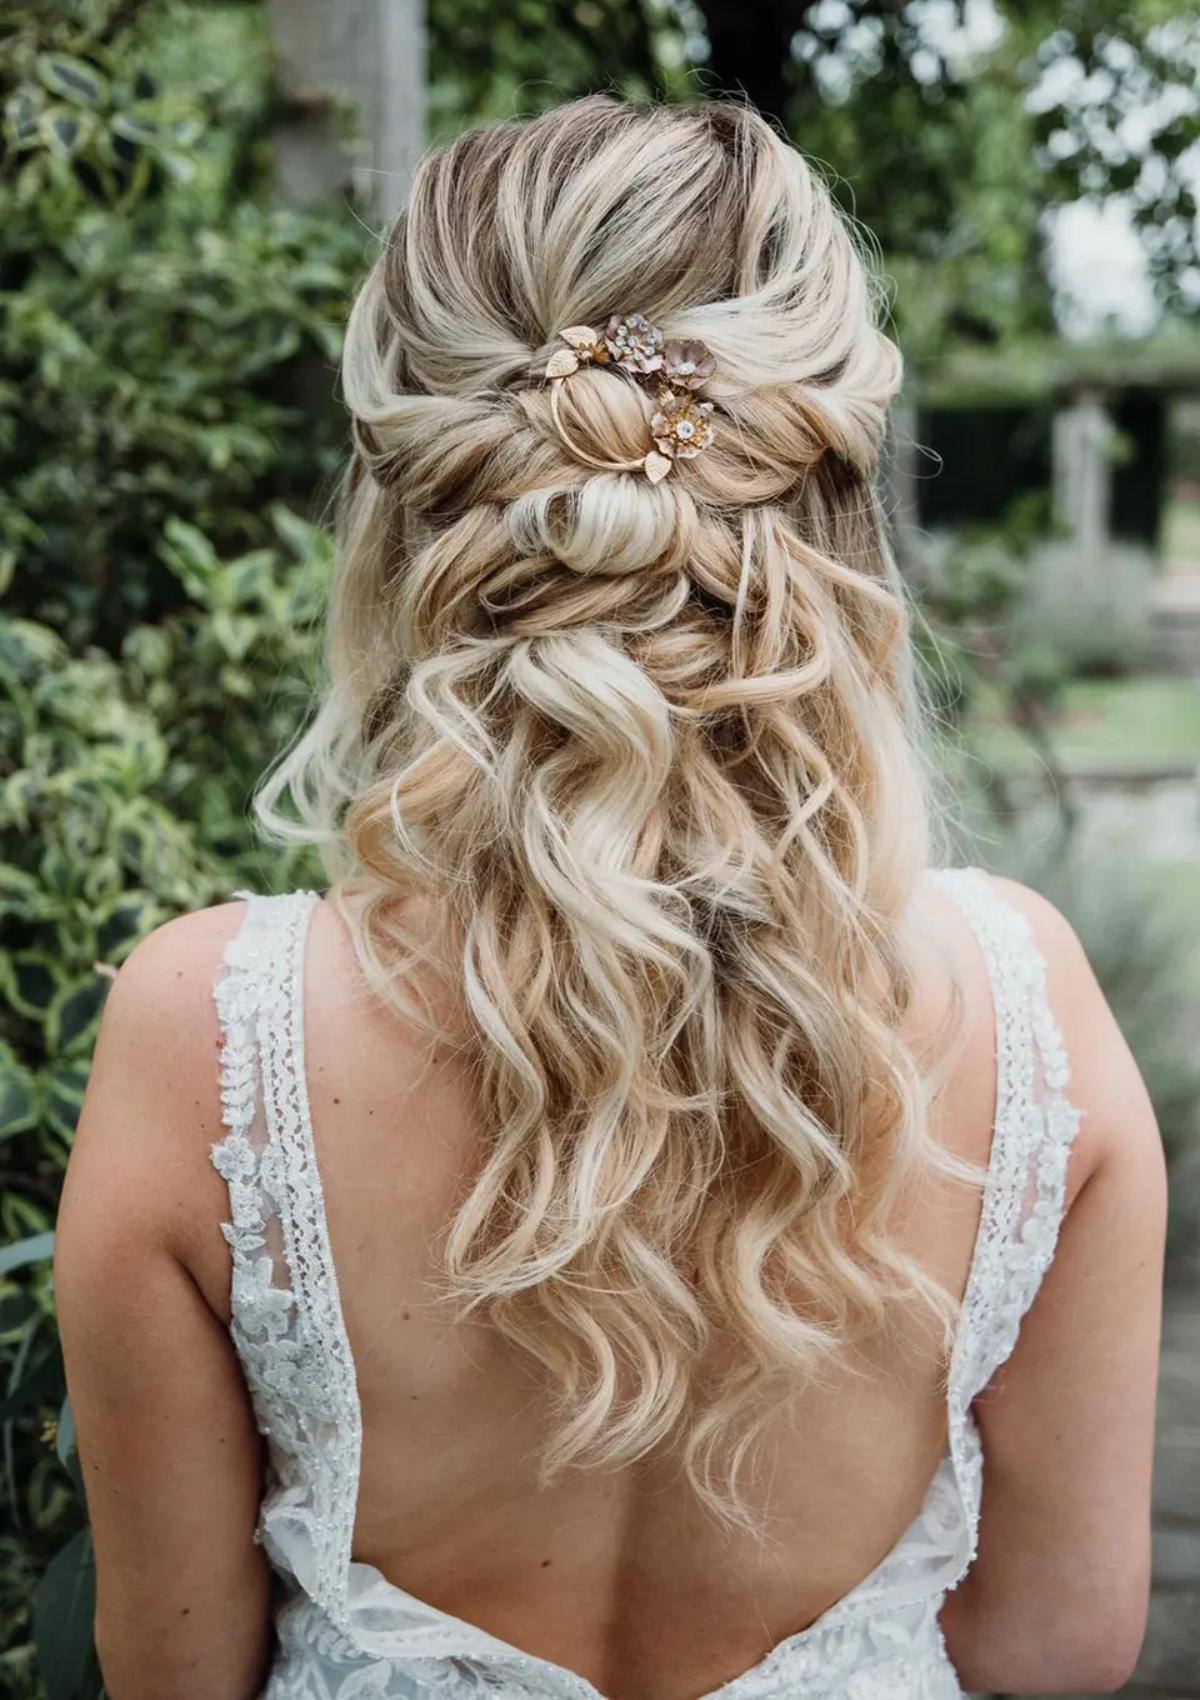 Wedding Hairstyles you can do BY YOURSELF!! - Kayley Melissa - YouTube